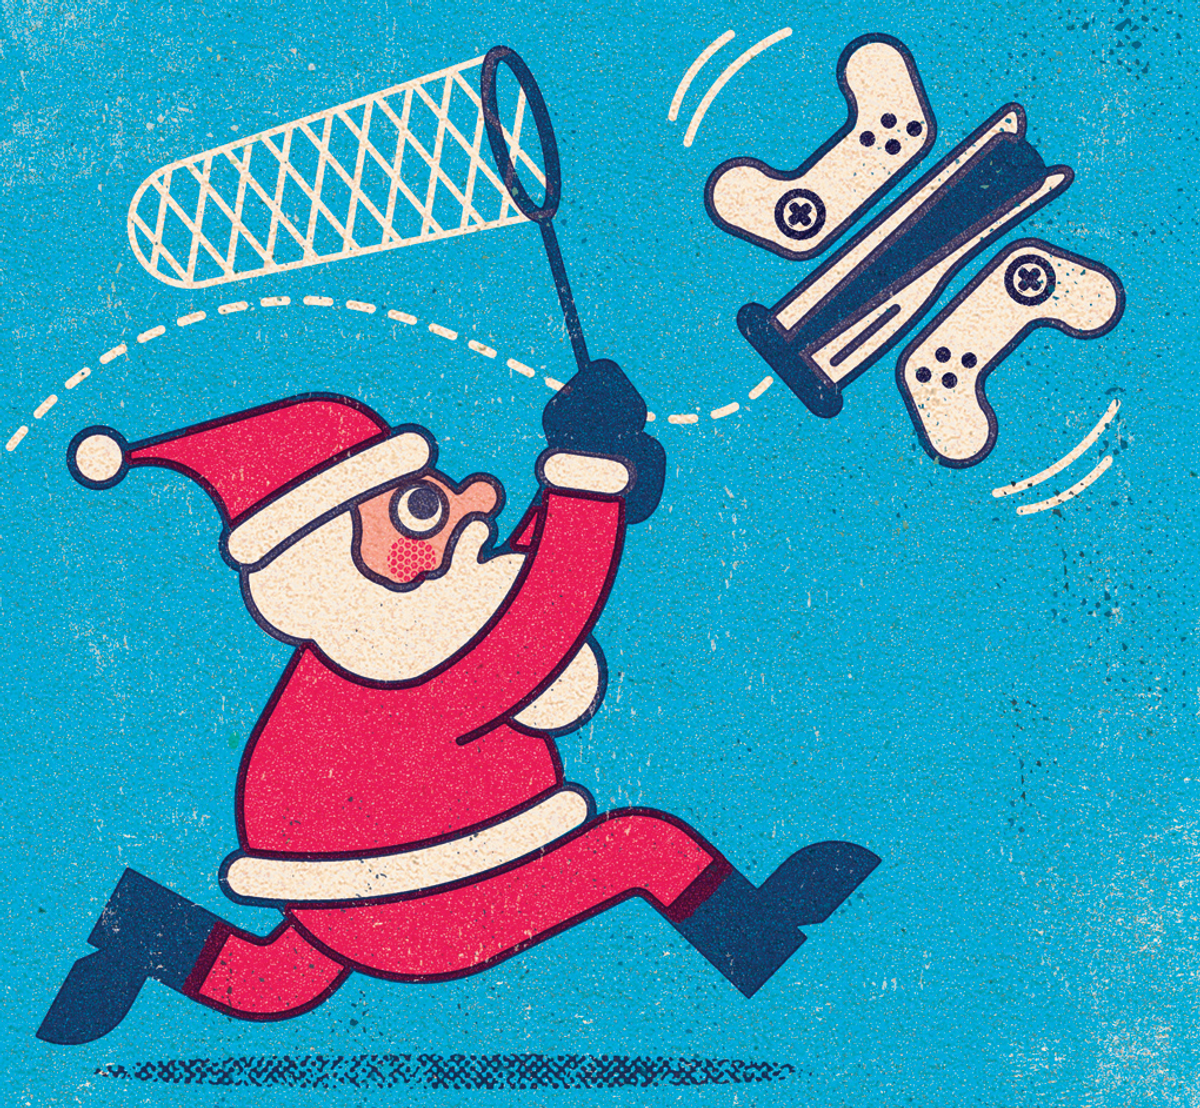 Santa holding a net chasing after a butterfly made out of a game system and controllers.  